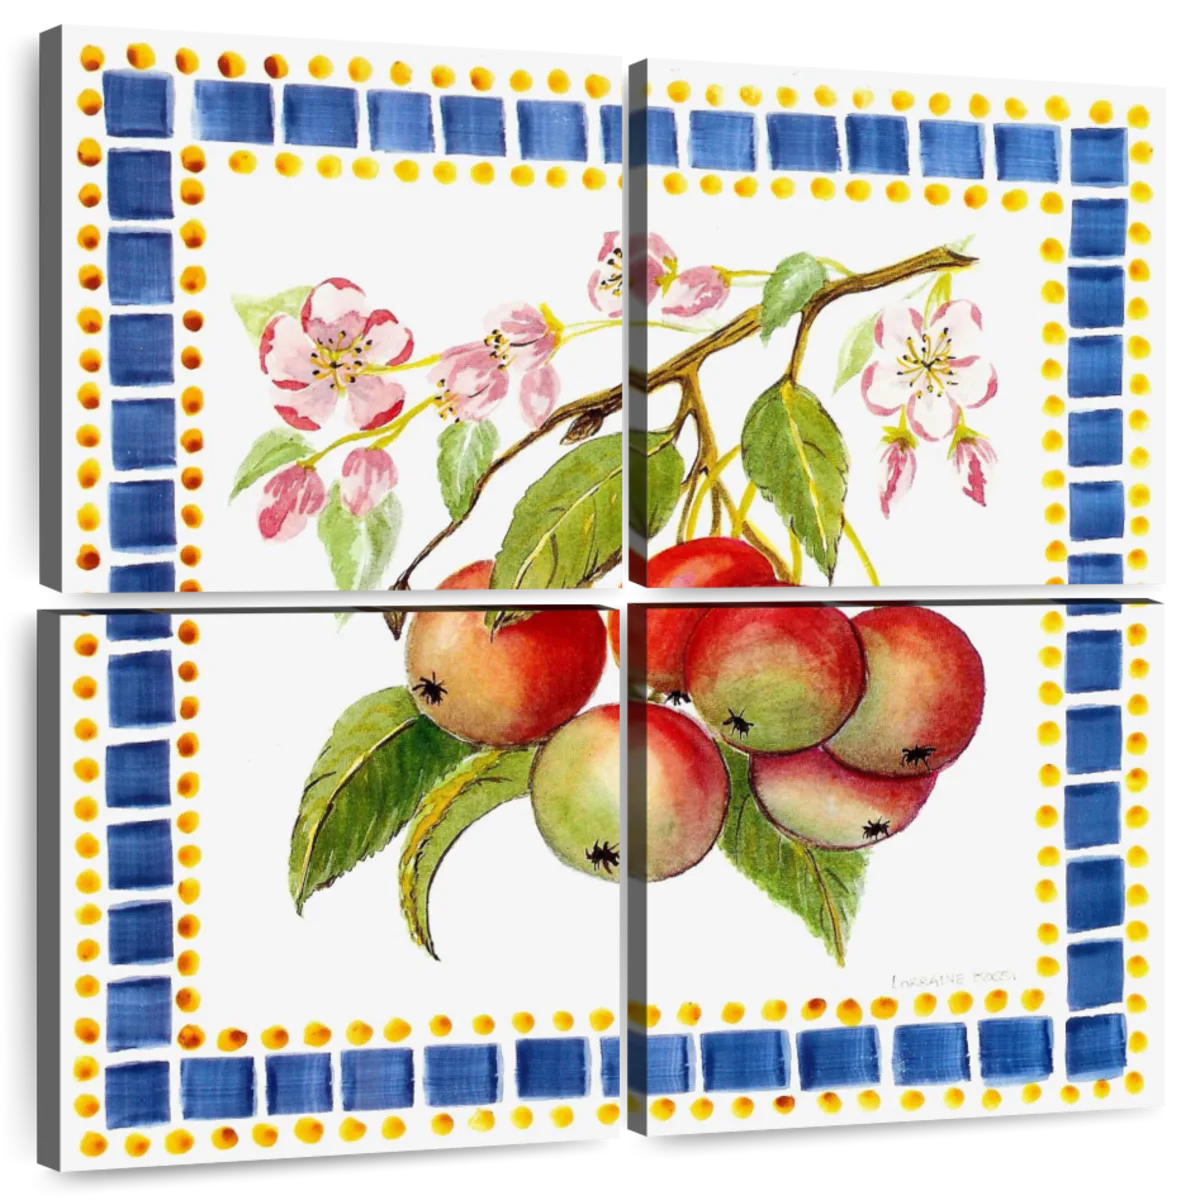 https://cdn.shopify.com/s/files/1/1568/8443/products/59d-art-e4y_layout-4-square_french-fruit-apple-4-piece-wall-art.webp?v=1671822396